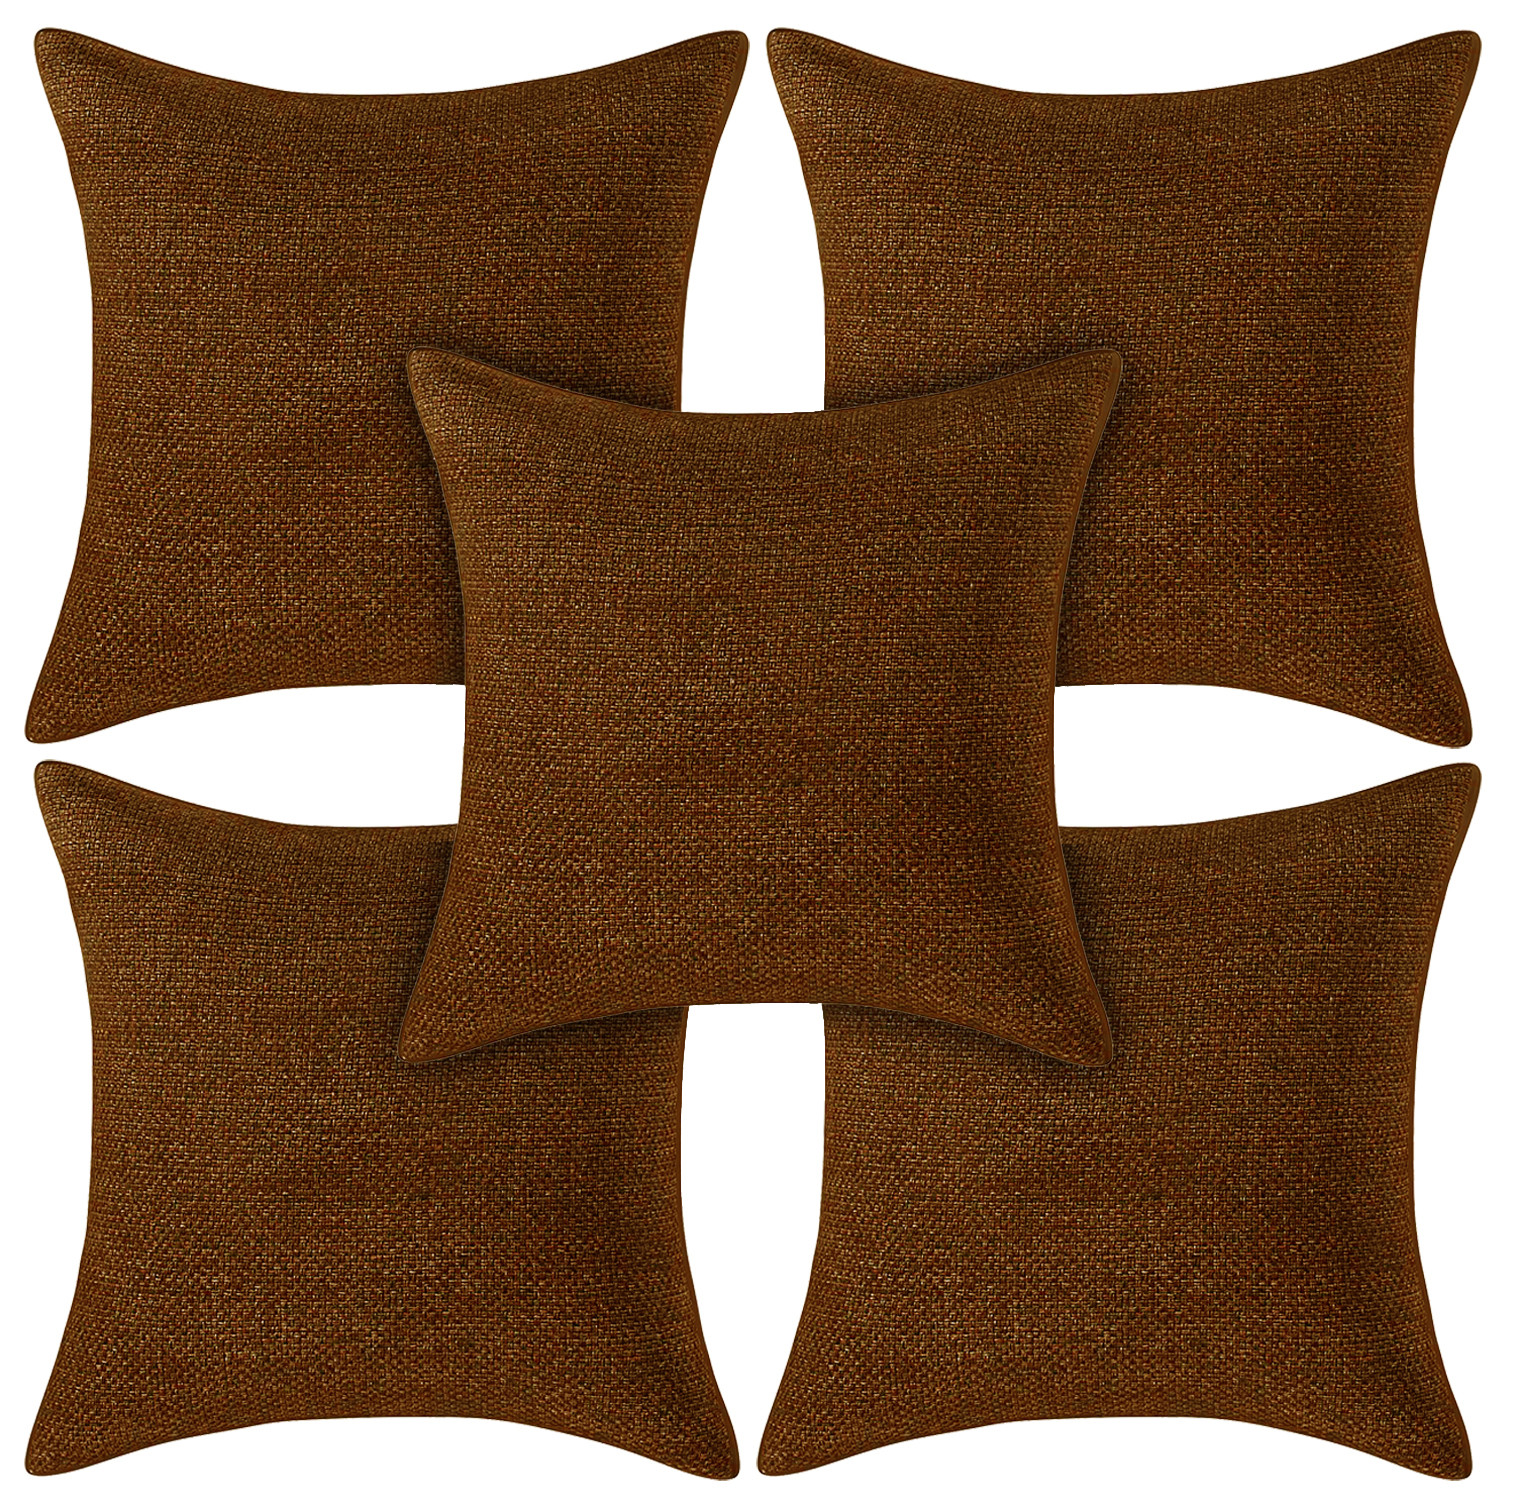 Kuber Industries Jute Blend Decorative Square Throw Pillow Cover Cushion Covers Pillowcase, Home Decor Decorations for Sofa Couch Bed Chair 16x16 Inch-(Brown)